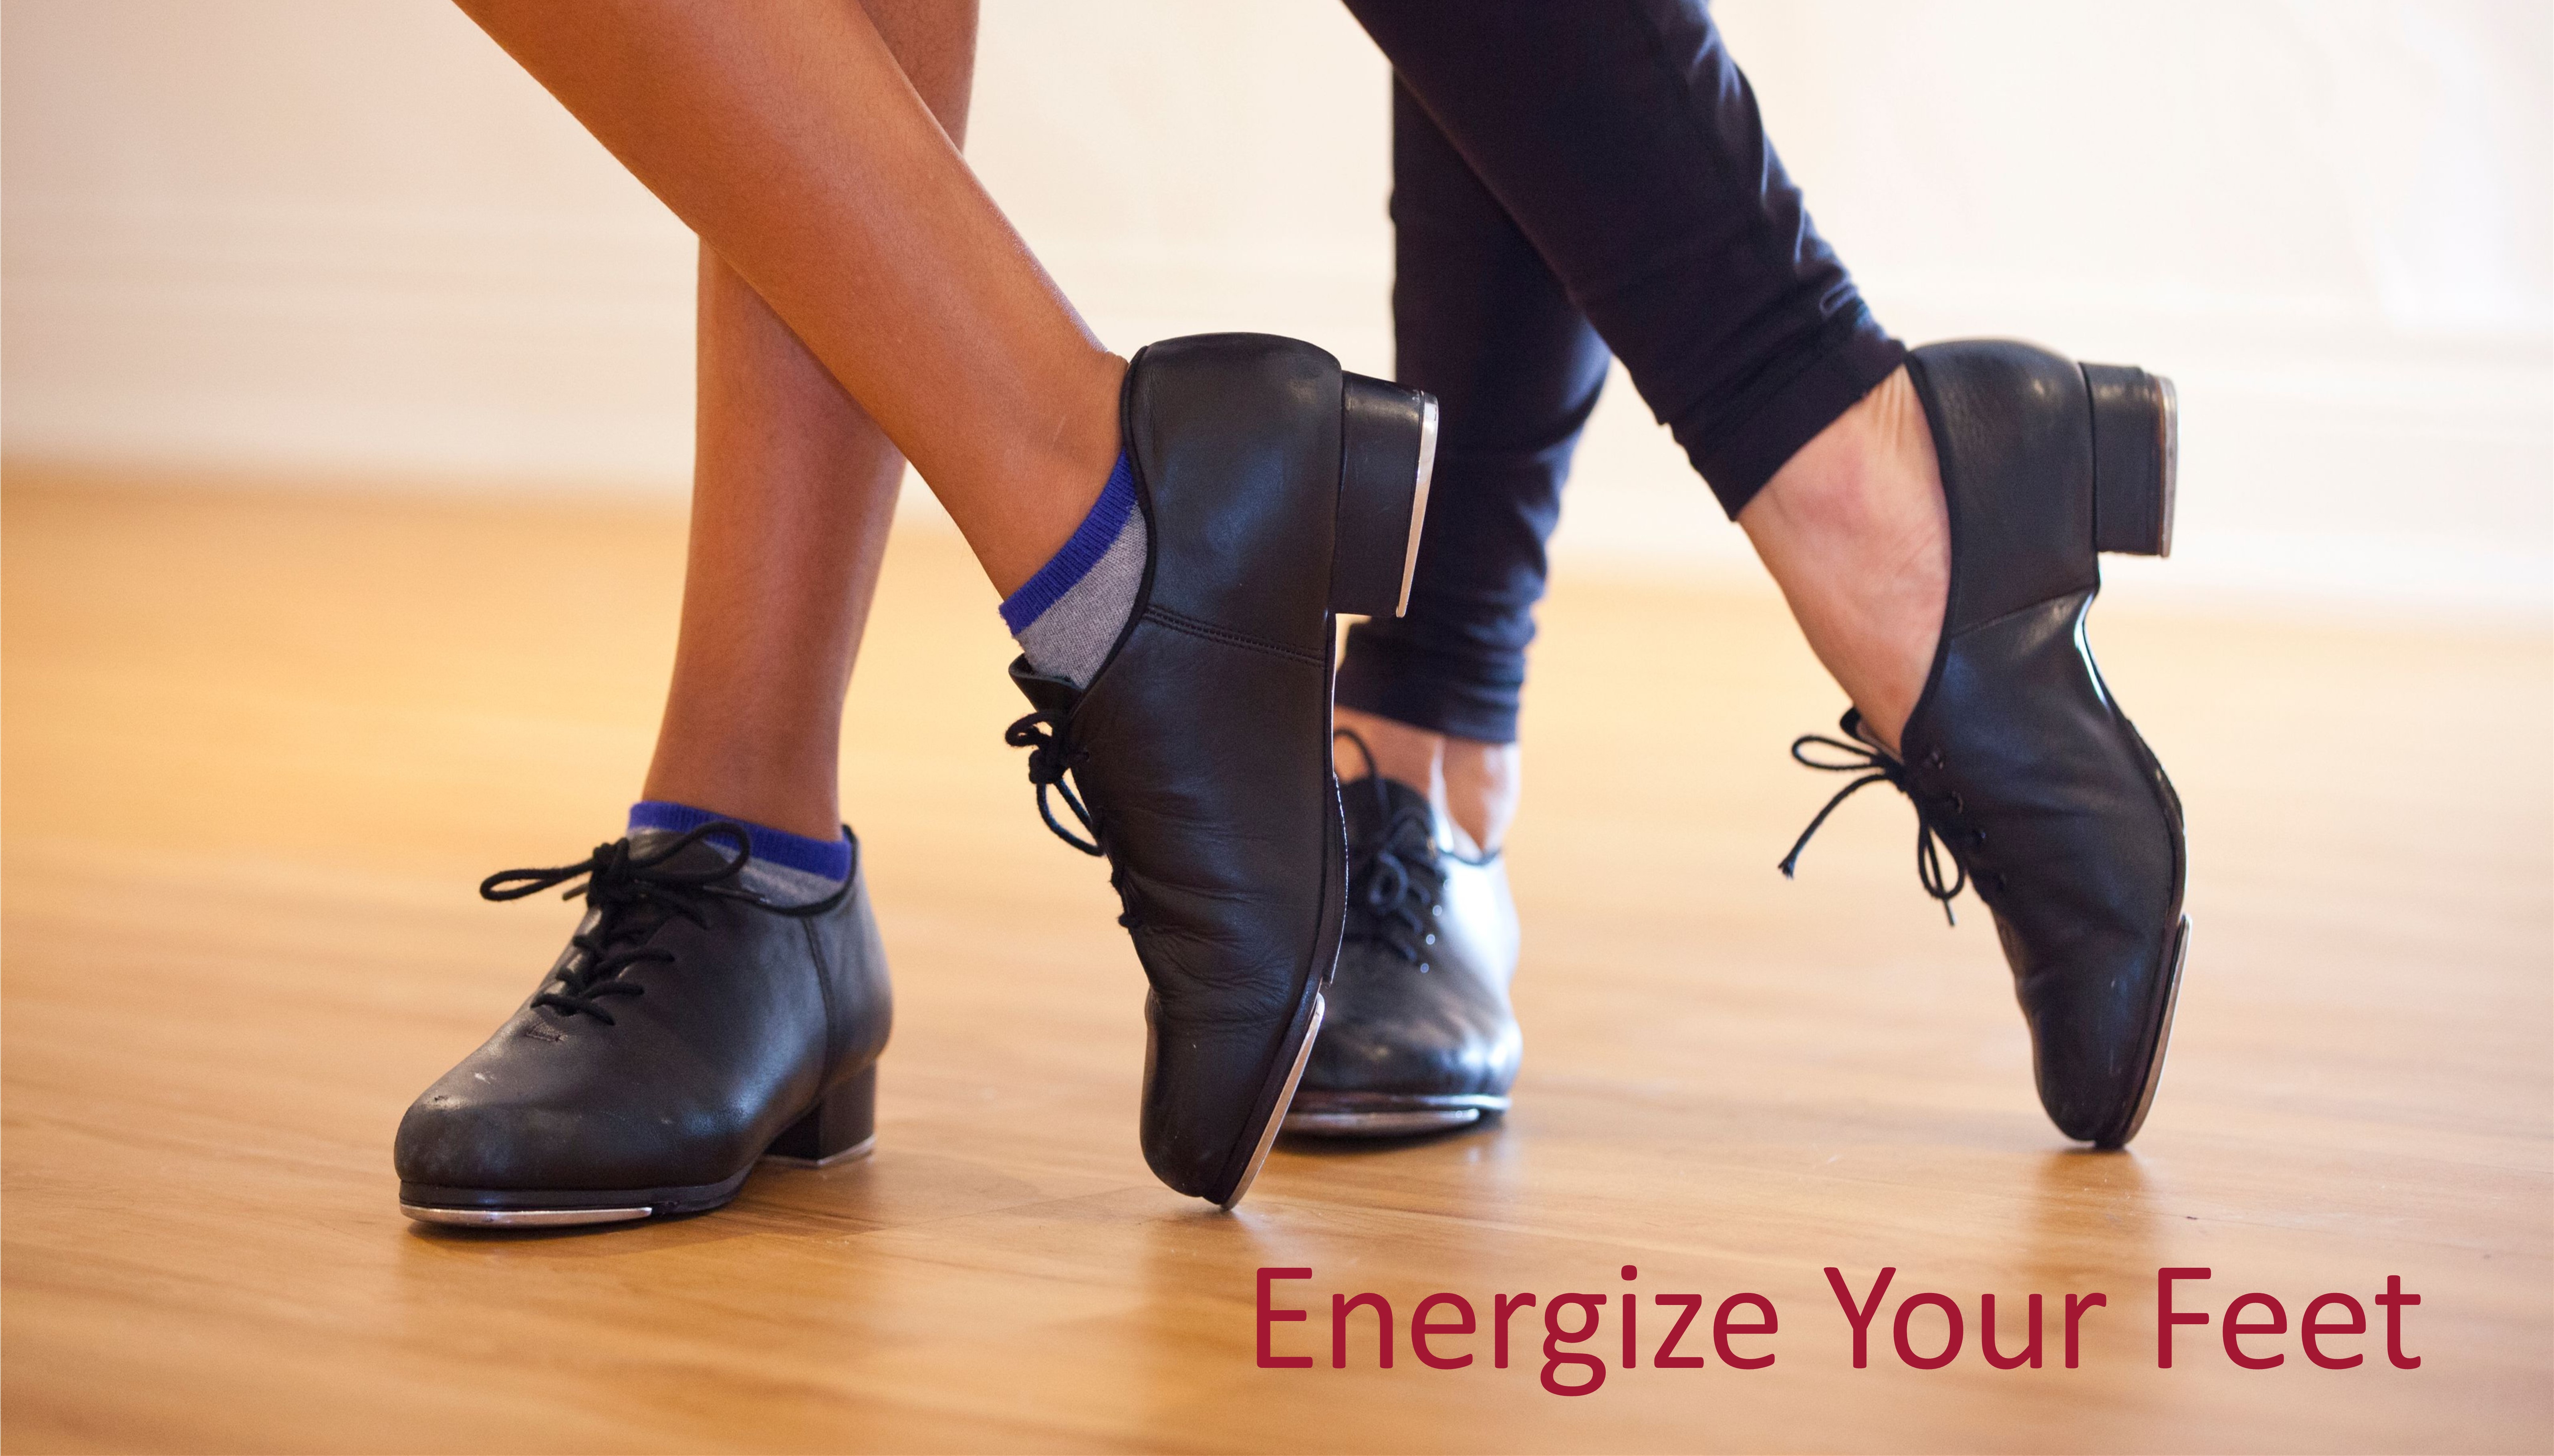 Energize Tired Feet